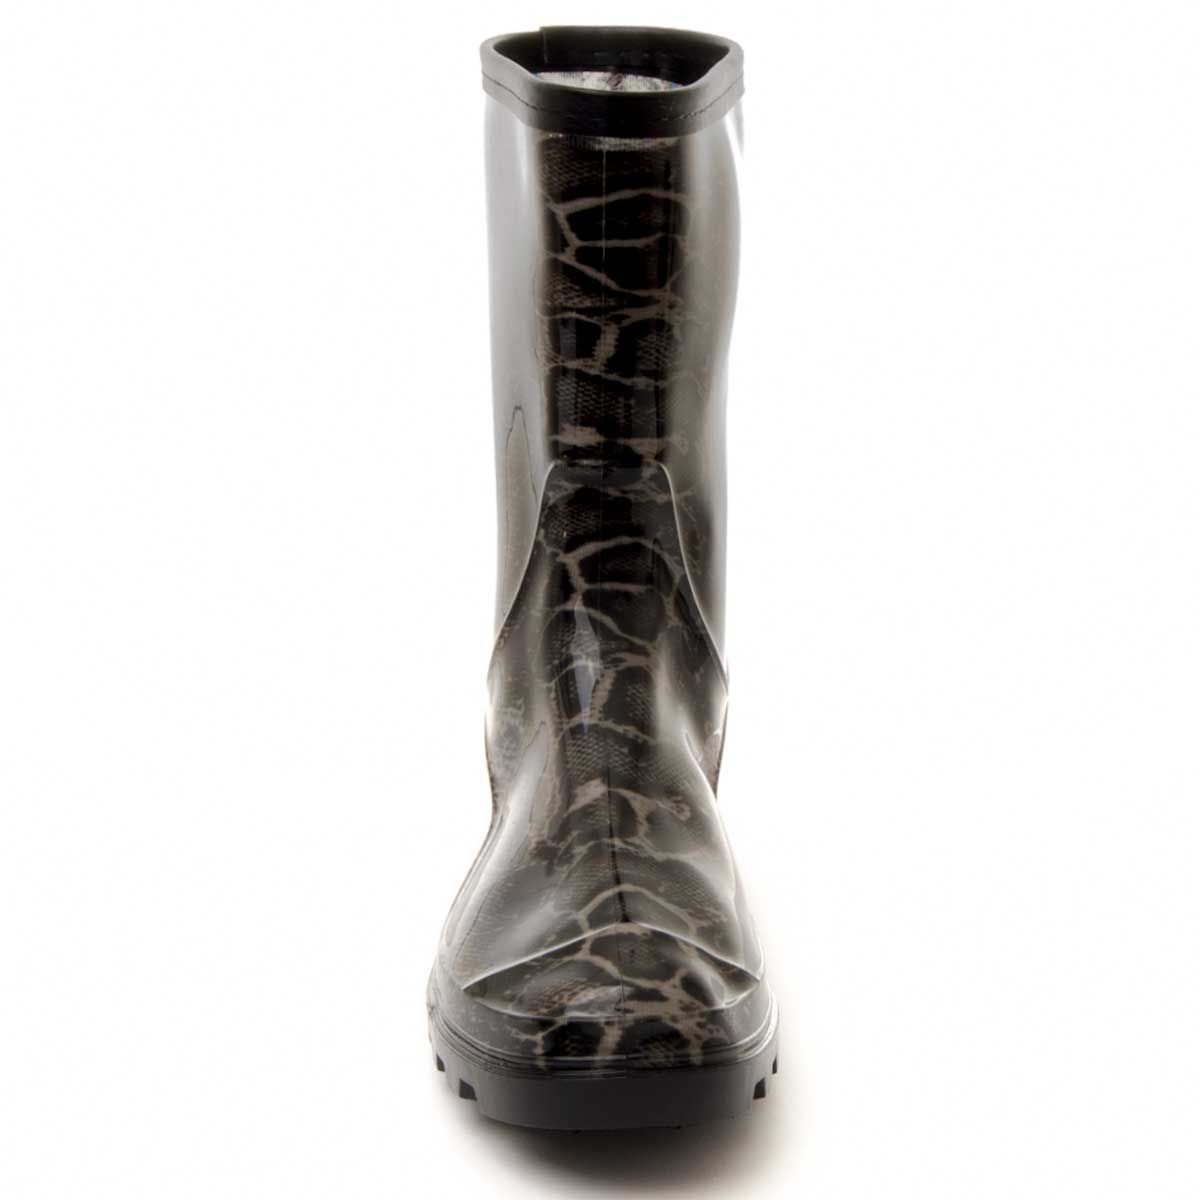 Capsula by Kelara collection. Average cane boot with measures: 20cm * 15cm. Perfect for rainy days as it keeps the feet warm and dry. Snake pattern. Watch as an external lining is a single piece so that water does not penetrate. Anti-slip rubber floor. Previous and later reinforcement for durability. Removable padded template.